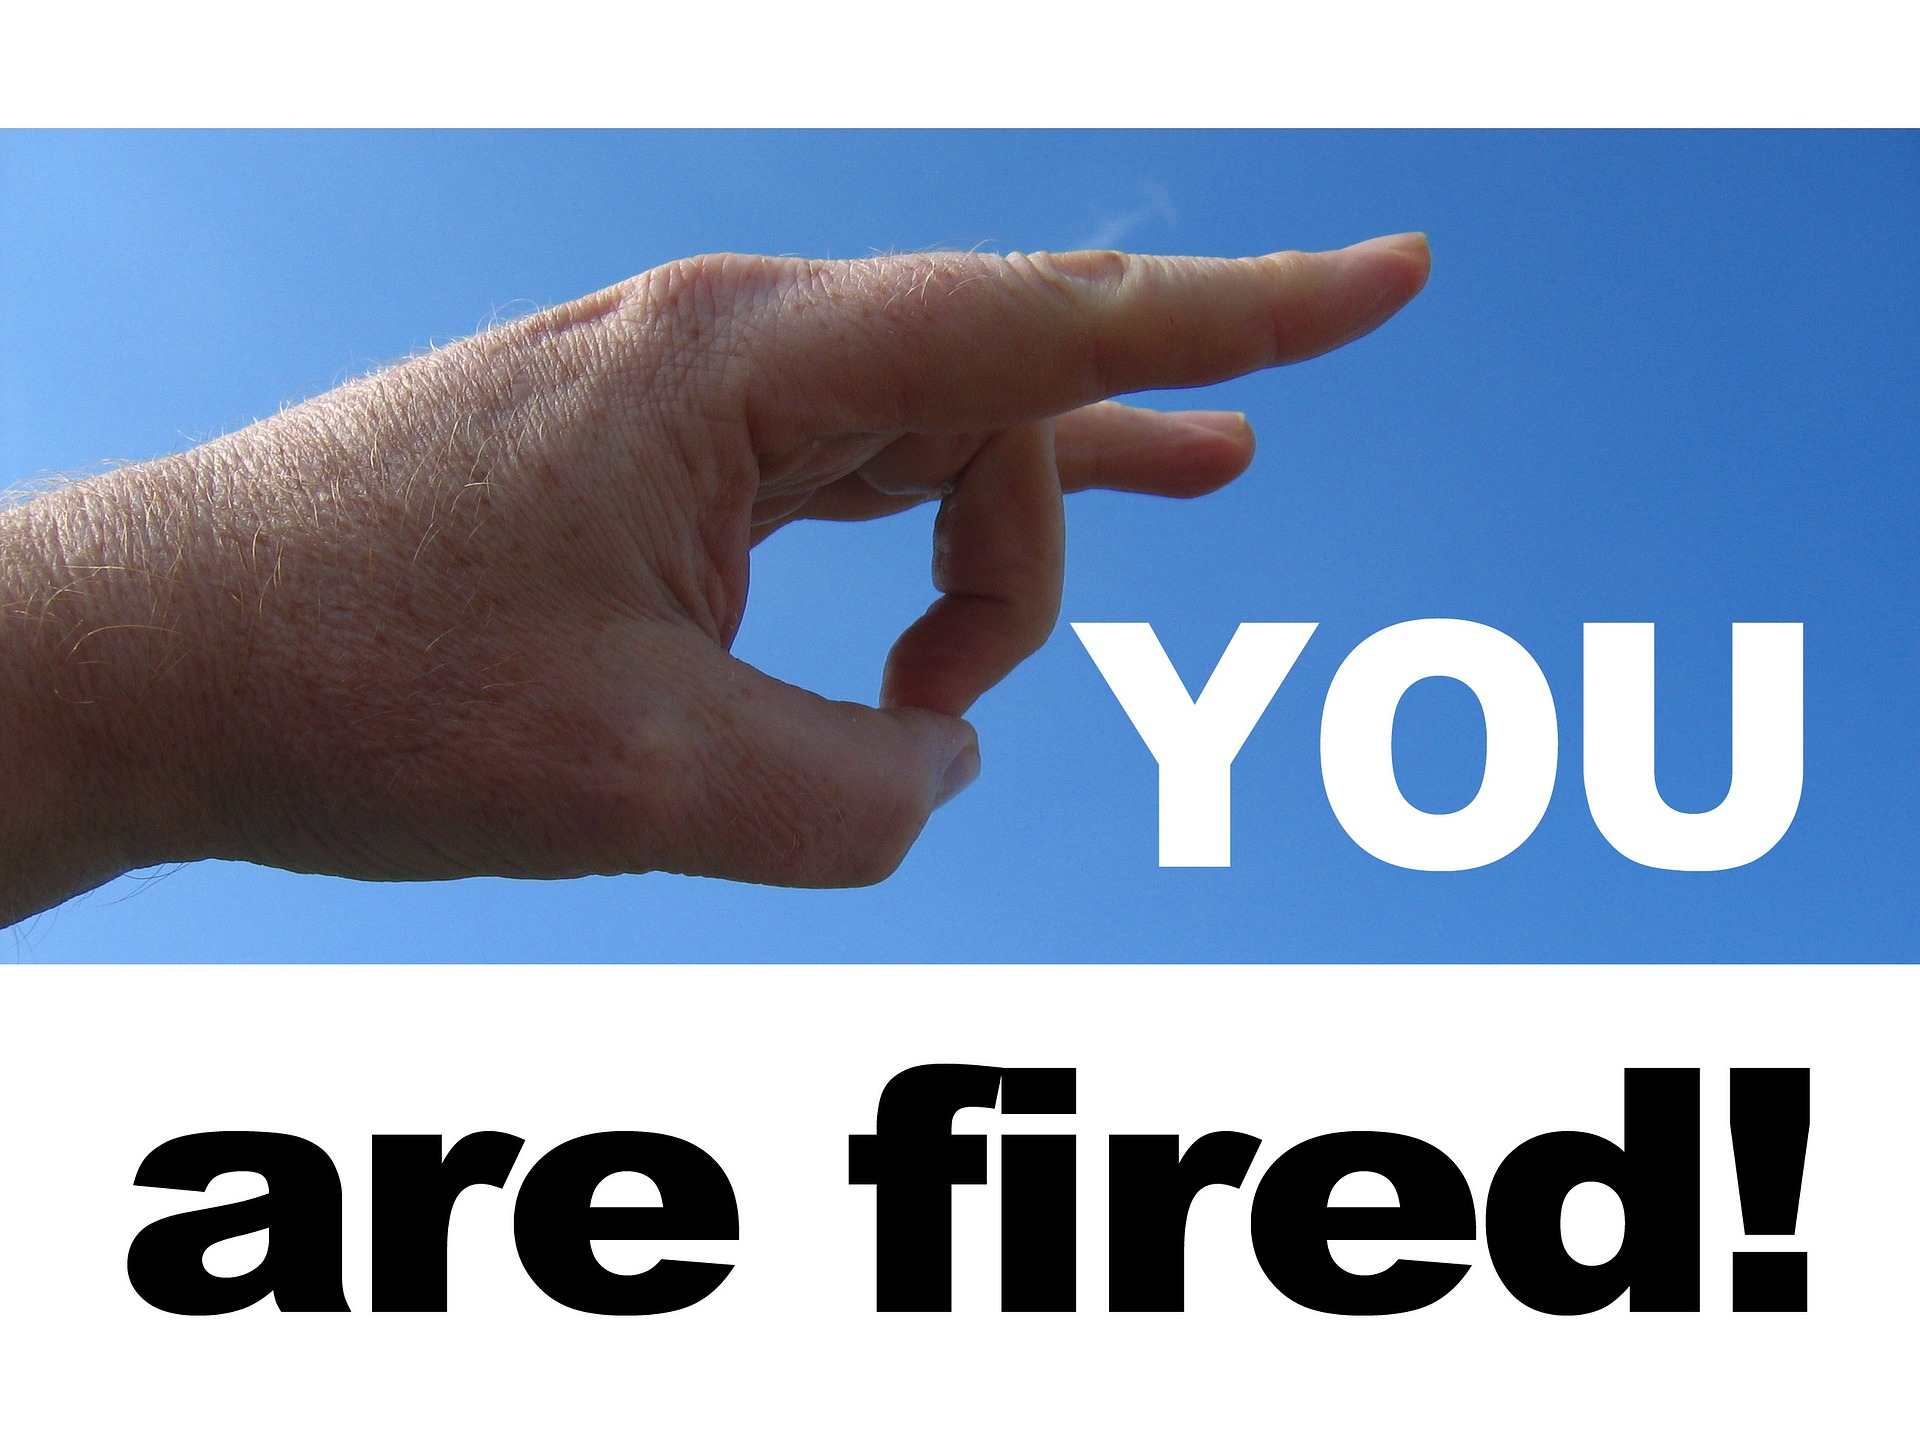 Man flicking finger at message that says You Are Fired; image by Geralt, via Pixabay.com.